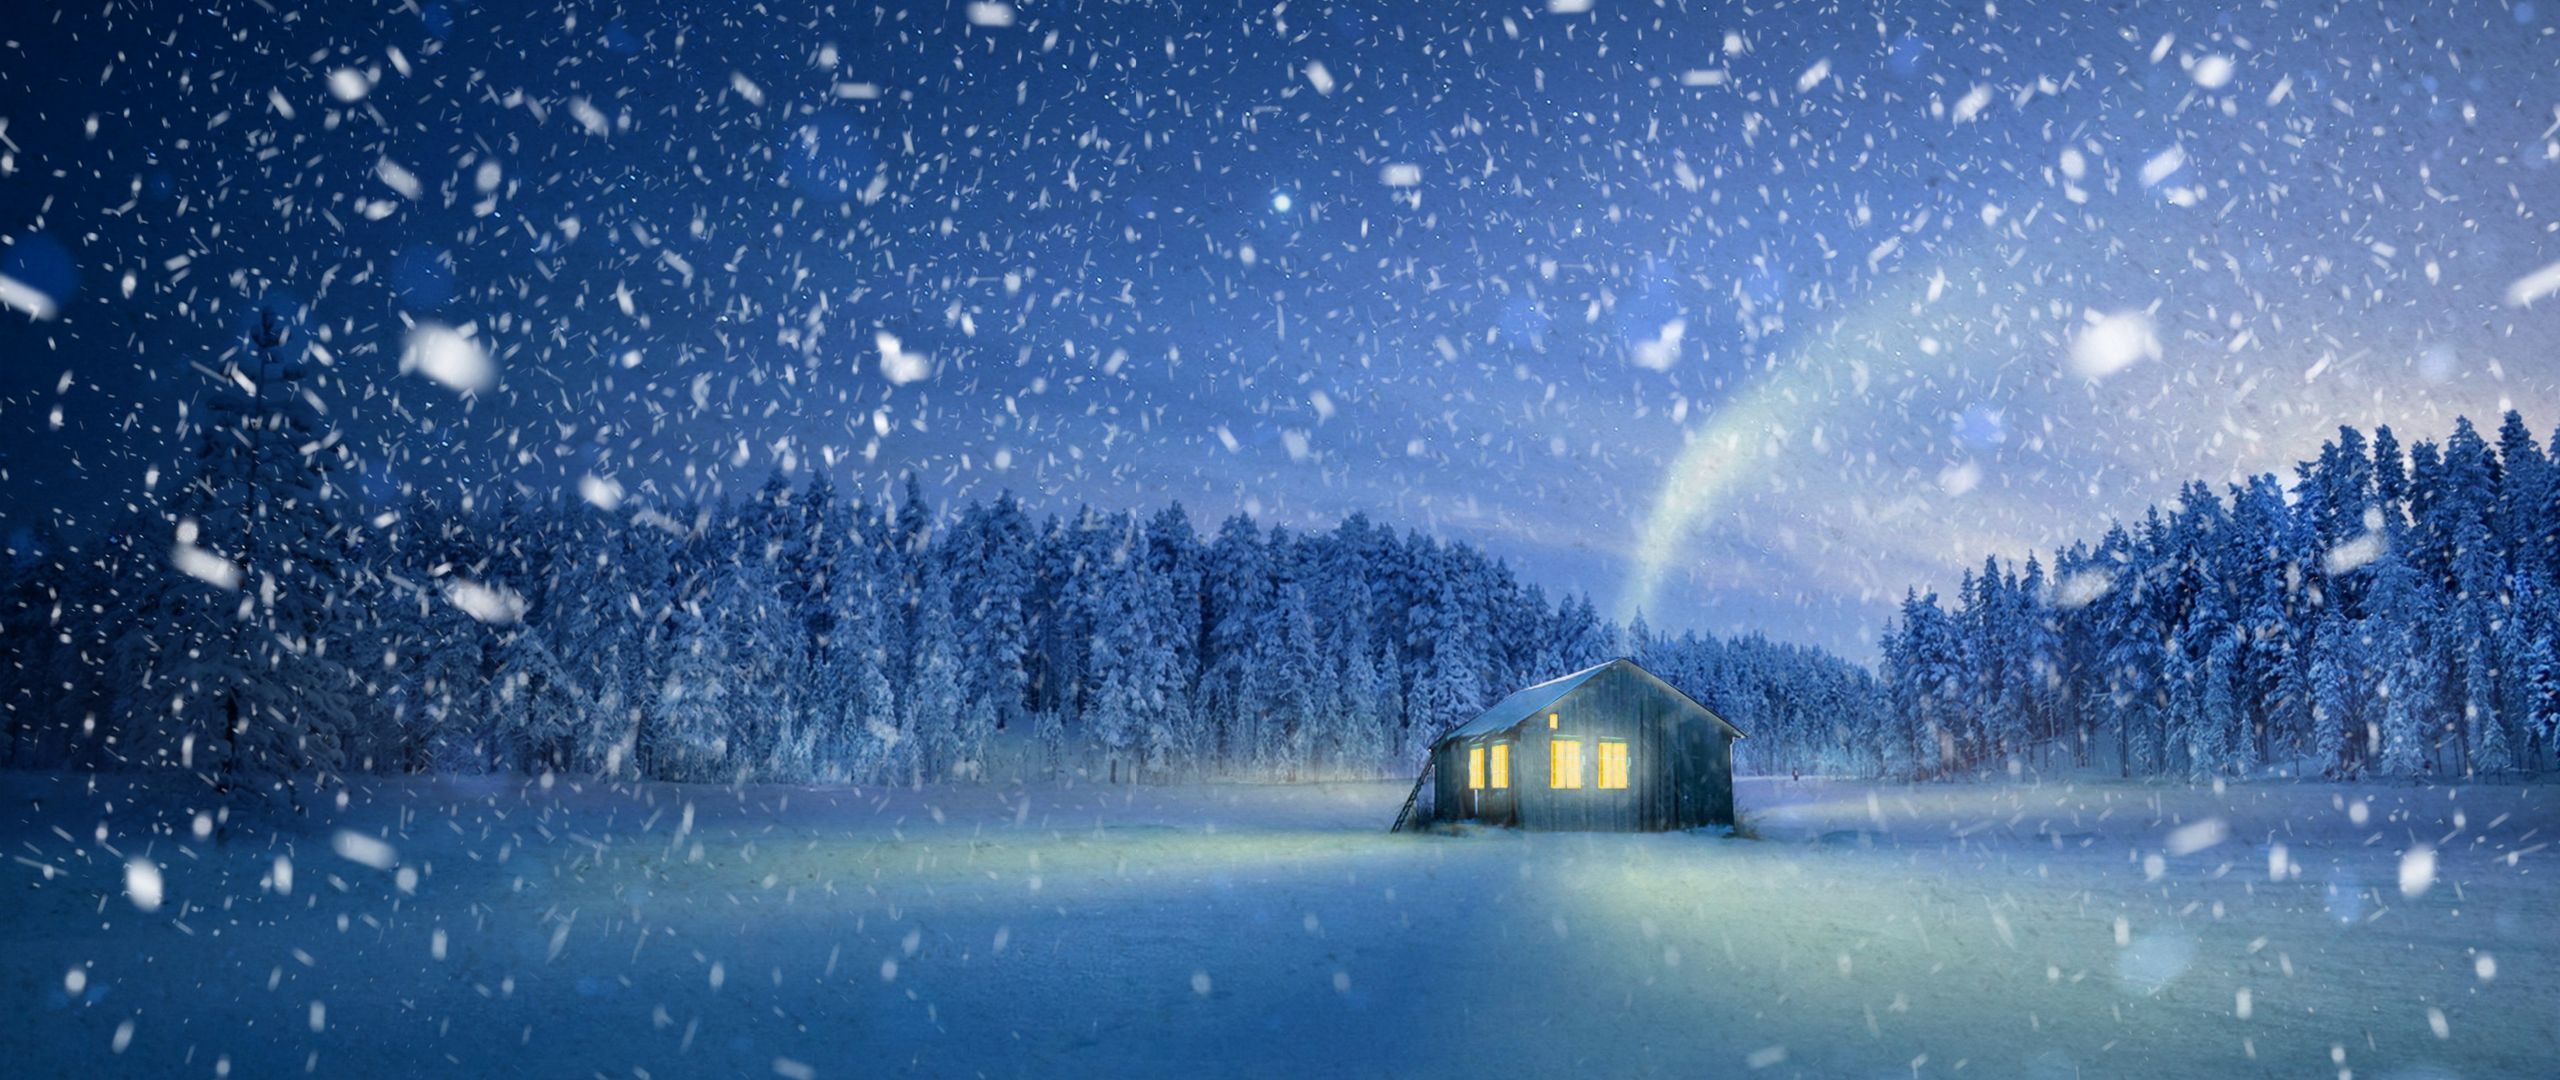 Magical Snow Wallpaper Free Magical Snow Background